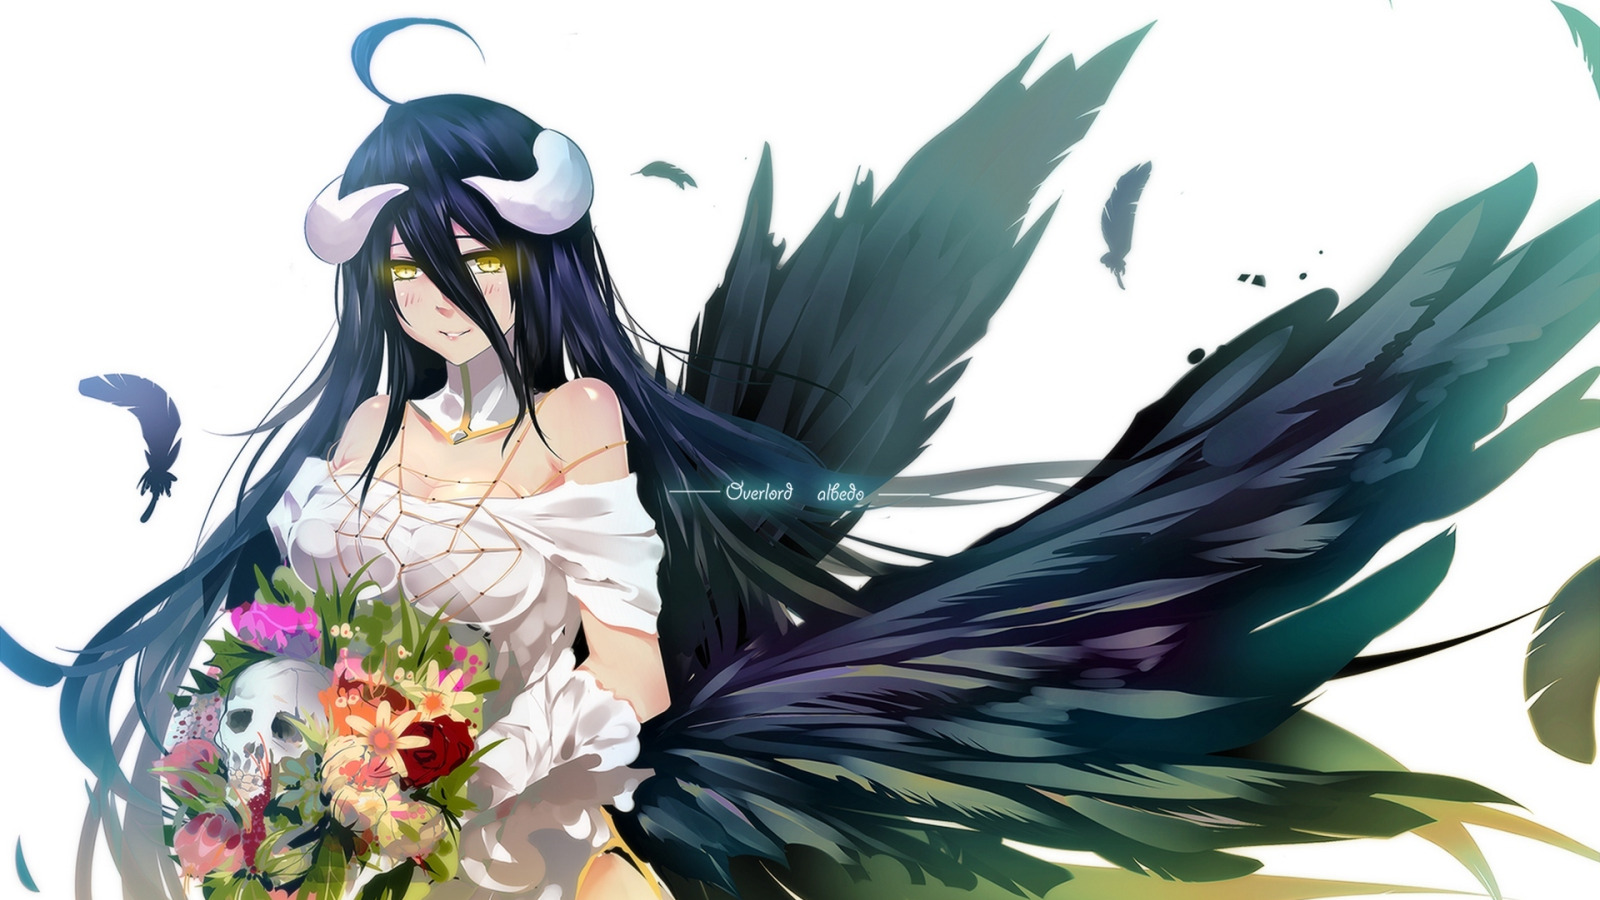 Download Wallpaper Girl Flowers Smile Bouquet Anime Art Horns a Biao Albedo Overlord Section Seinen In Resolution 1600x900